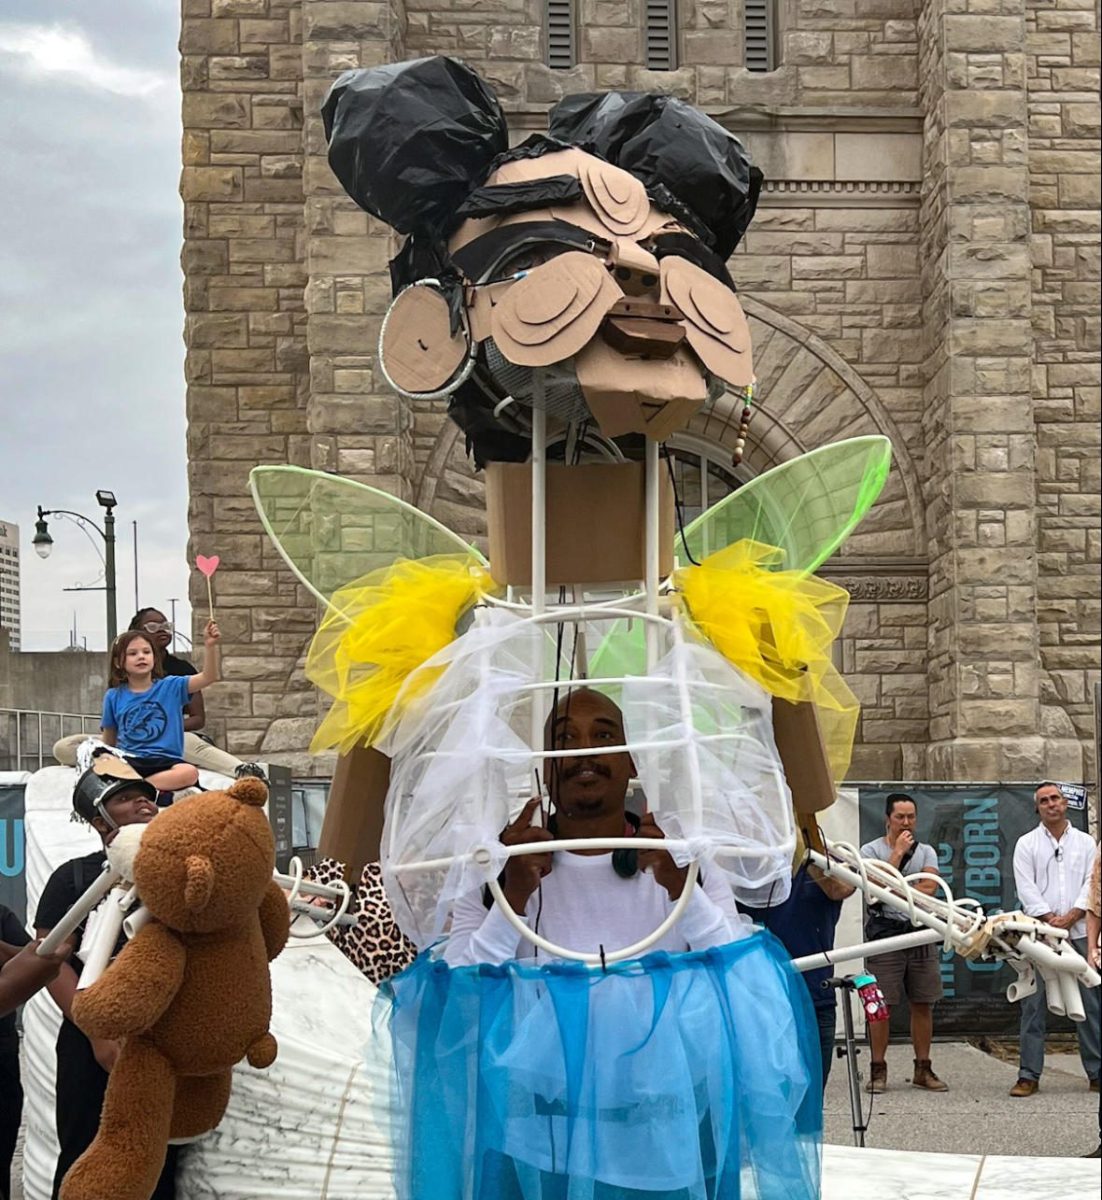 Jeghettos+eight+foot+puppet%2C+Imani%2C++stands+in+front+of+the+Historic+Clayborn+Temple+while+sporting+her+fairy+wings+and+tutu.+Imani+represents+the+new+generation+of+Memphians+and+the+hope+they+provide+for+the+future.+